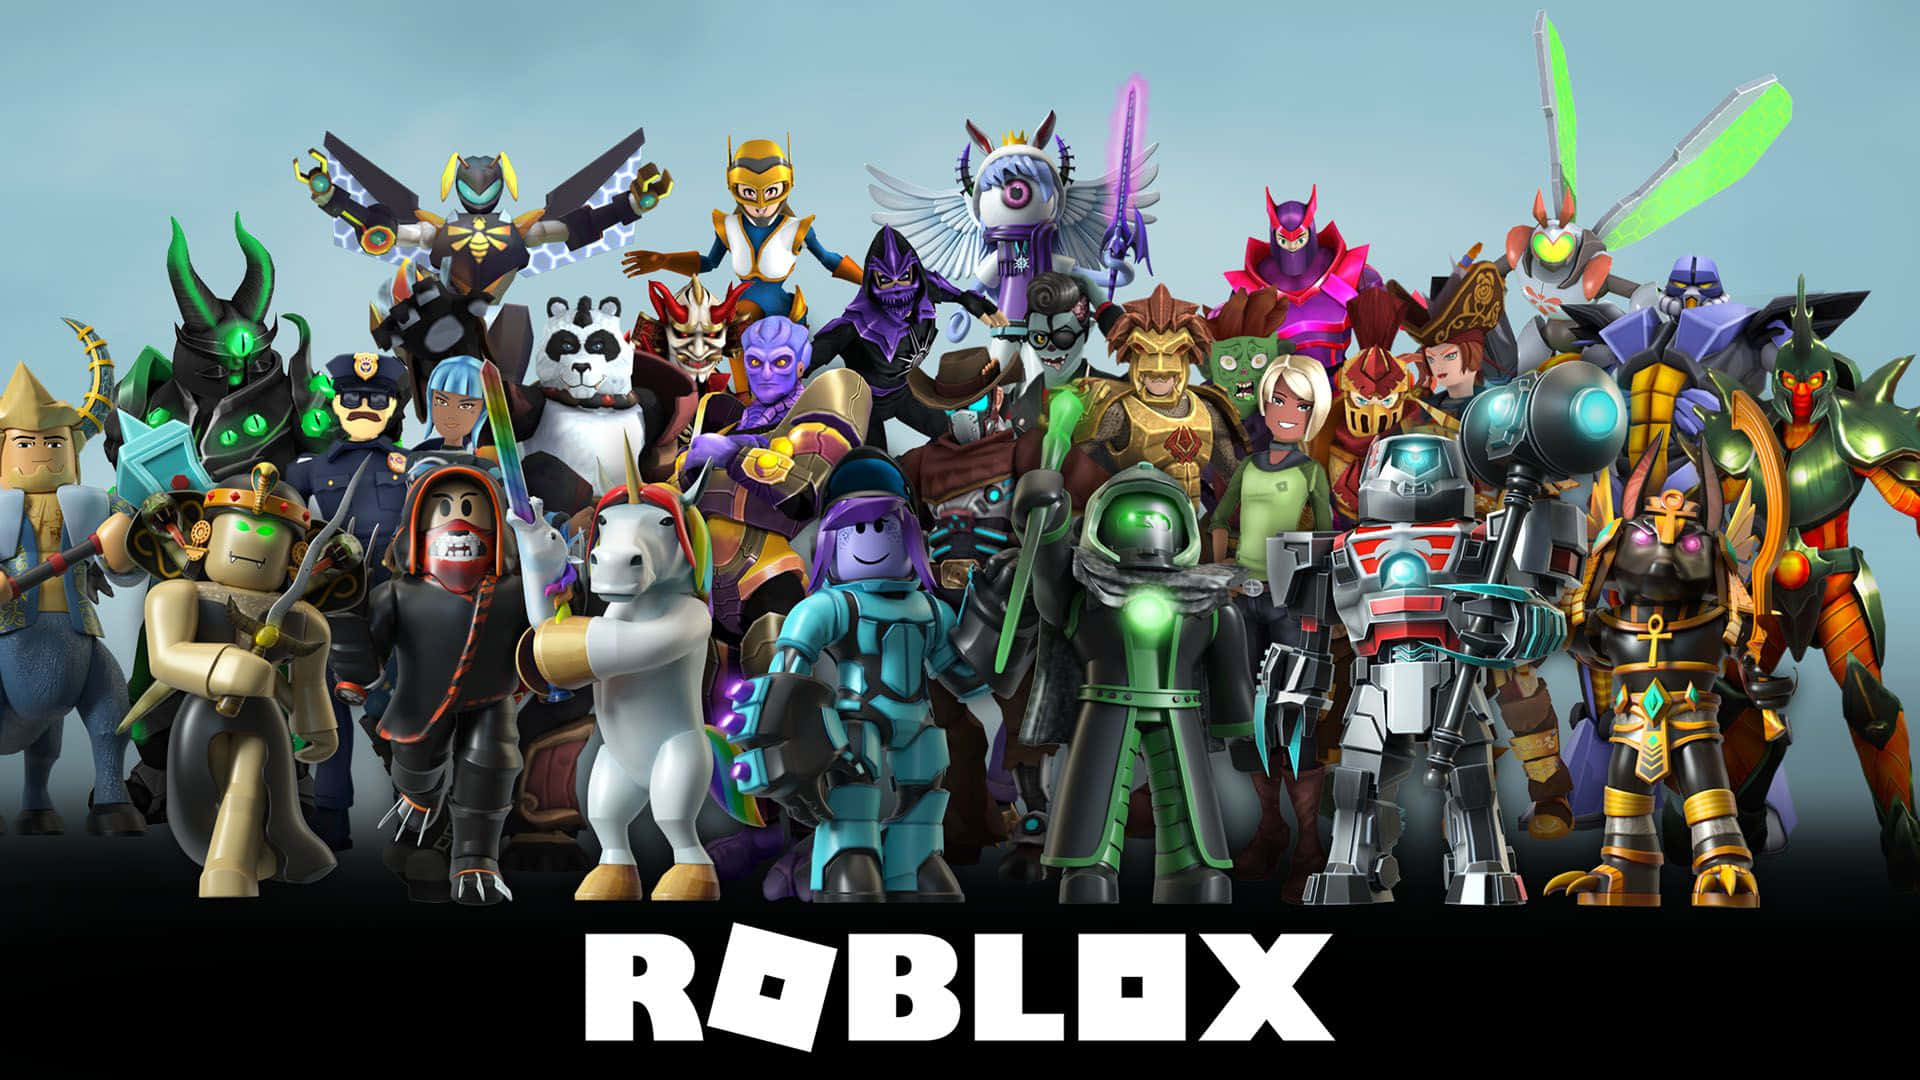 Customize your own Roblox avatar Wallpaper